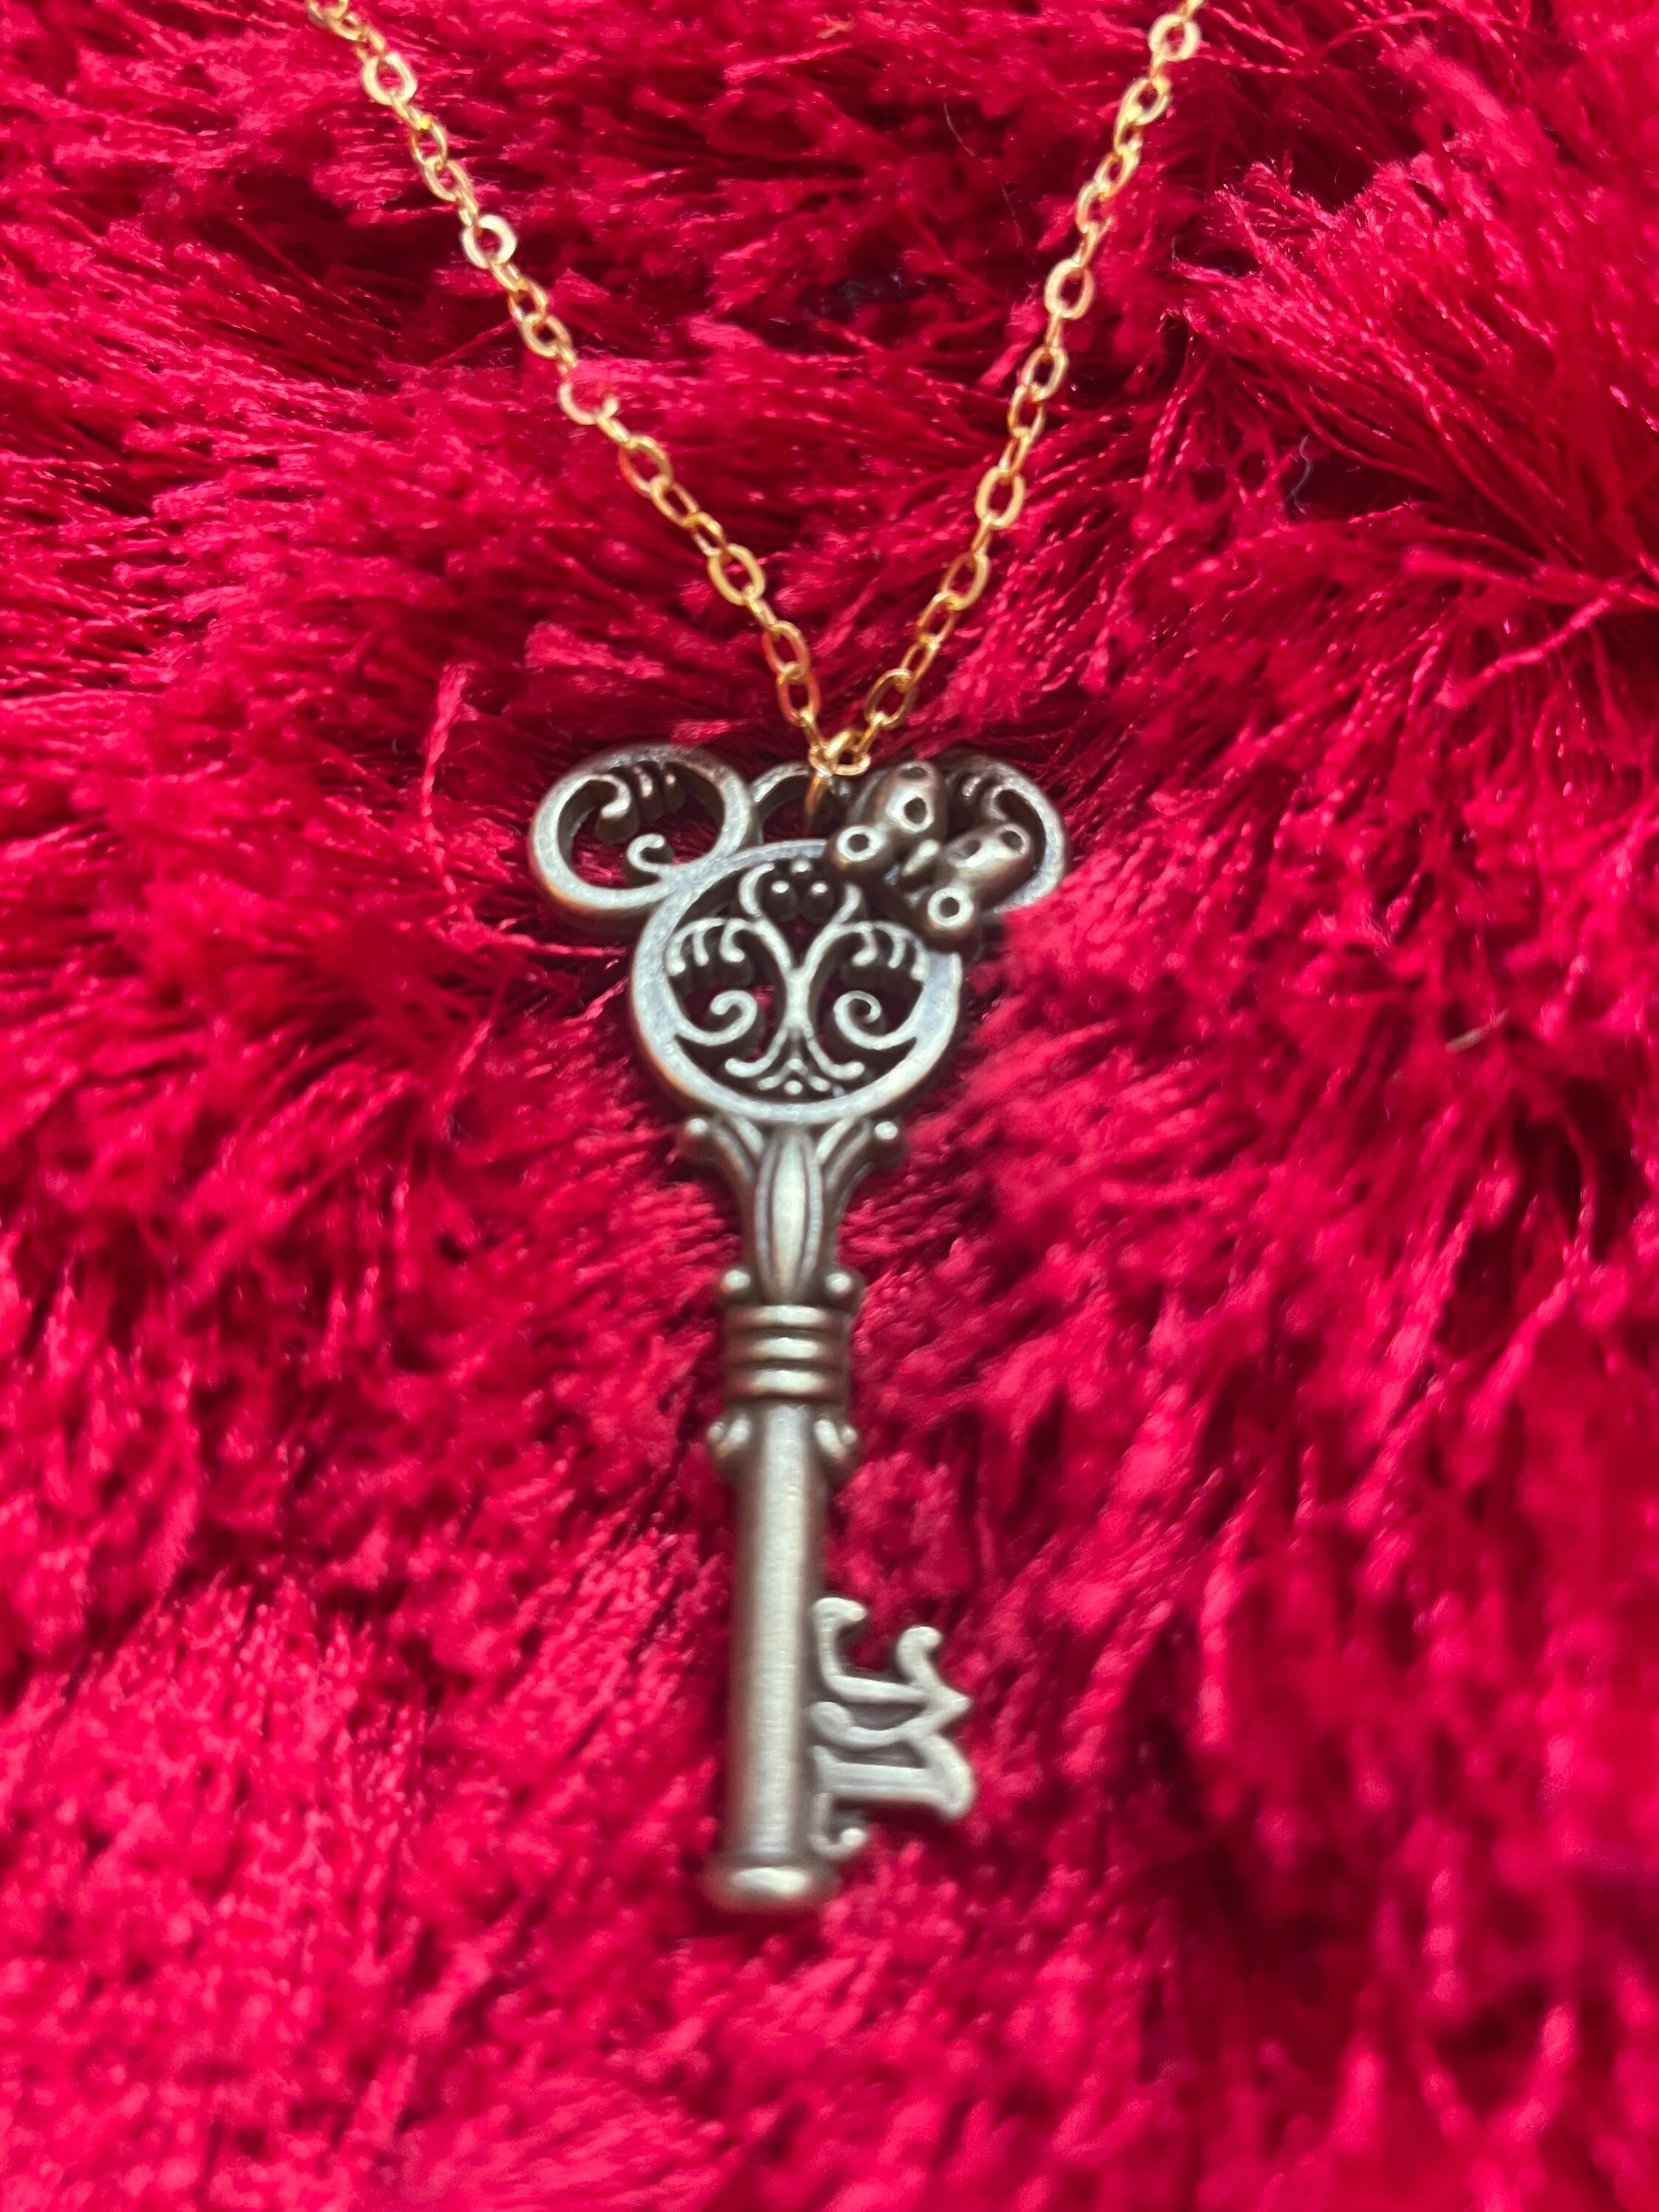 Character inspired necklaces including Mickey holds the key | Etsy